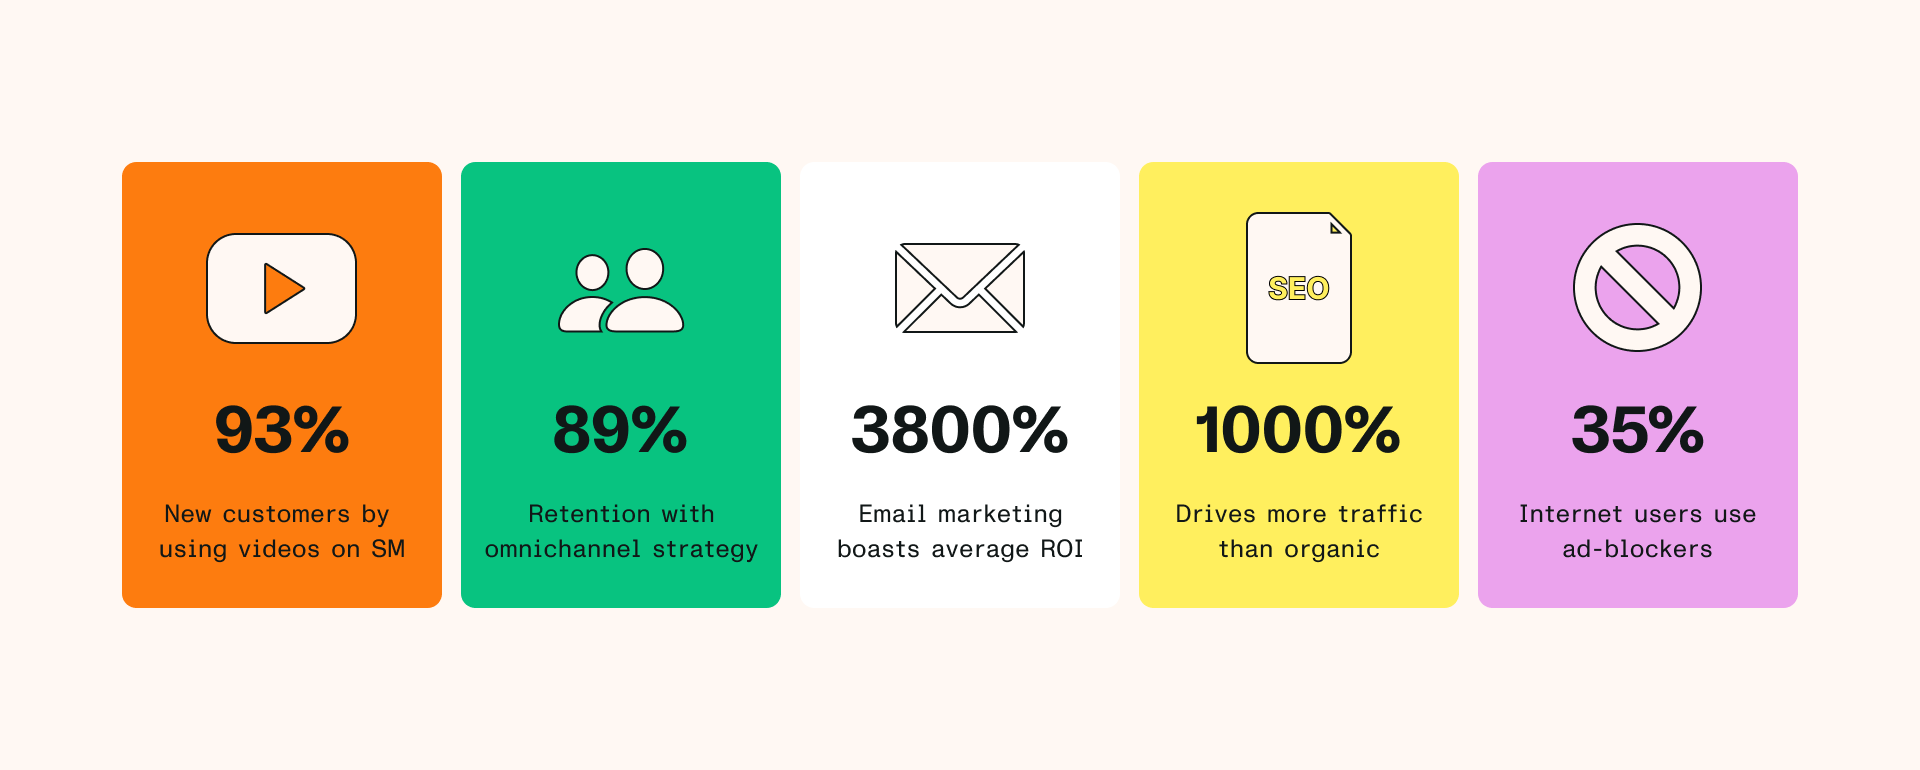 Infographic with colorful cards showing marketing statistics and icons